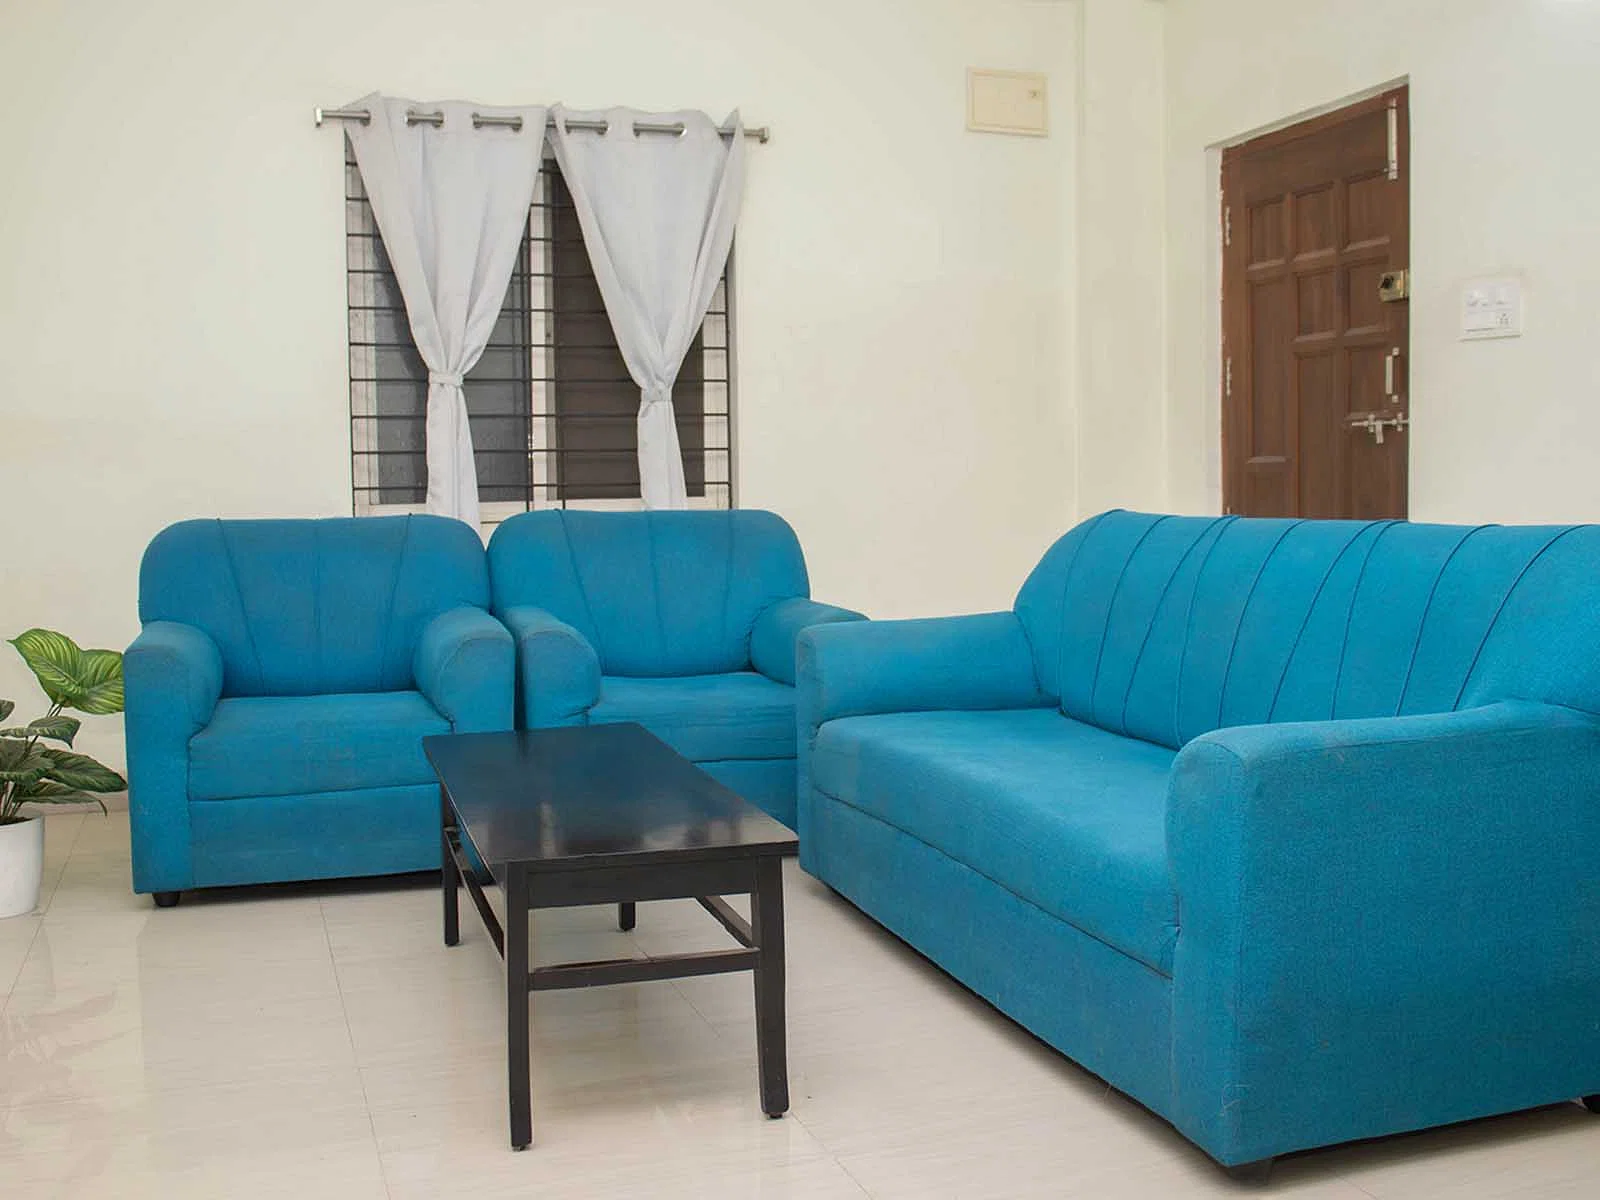 fully furnished Zolo single rooms for rent near me-check out now-Zolo Grit